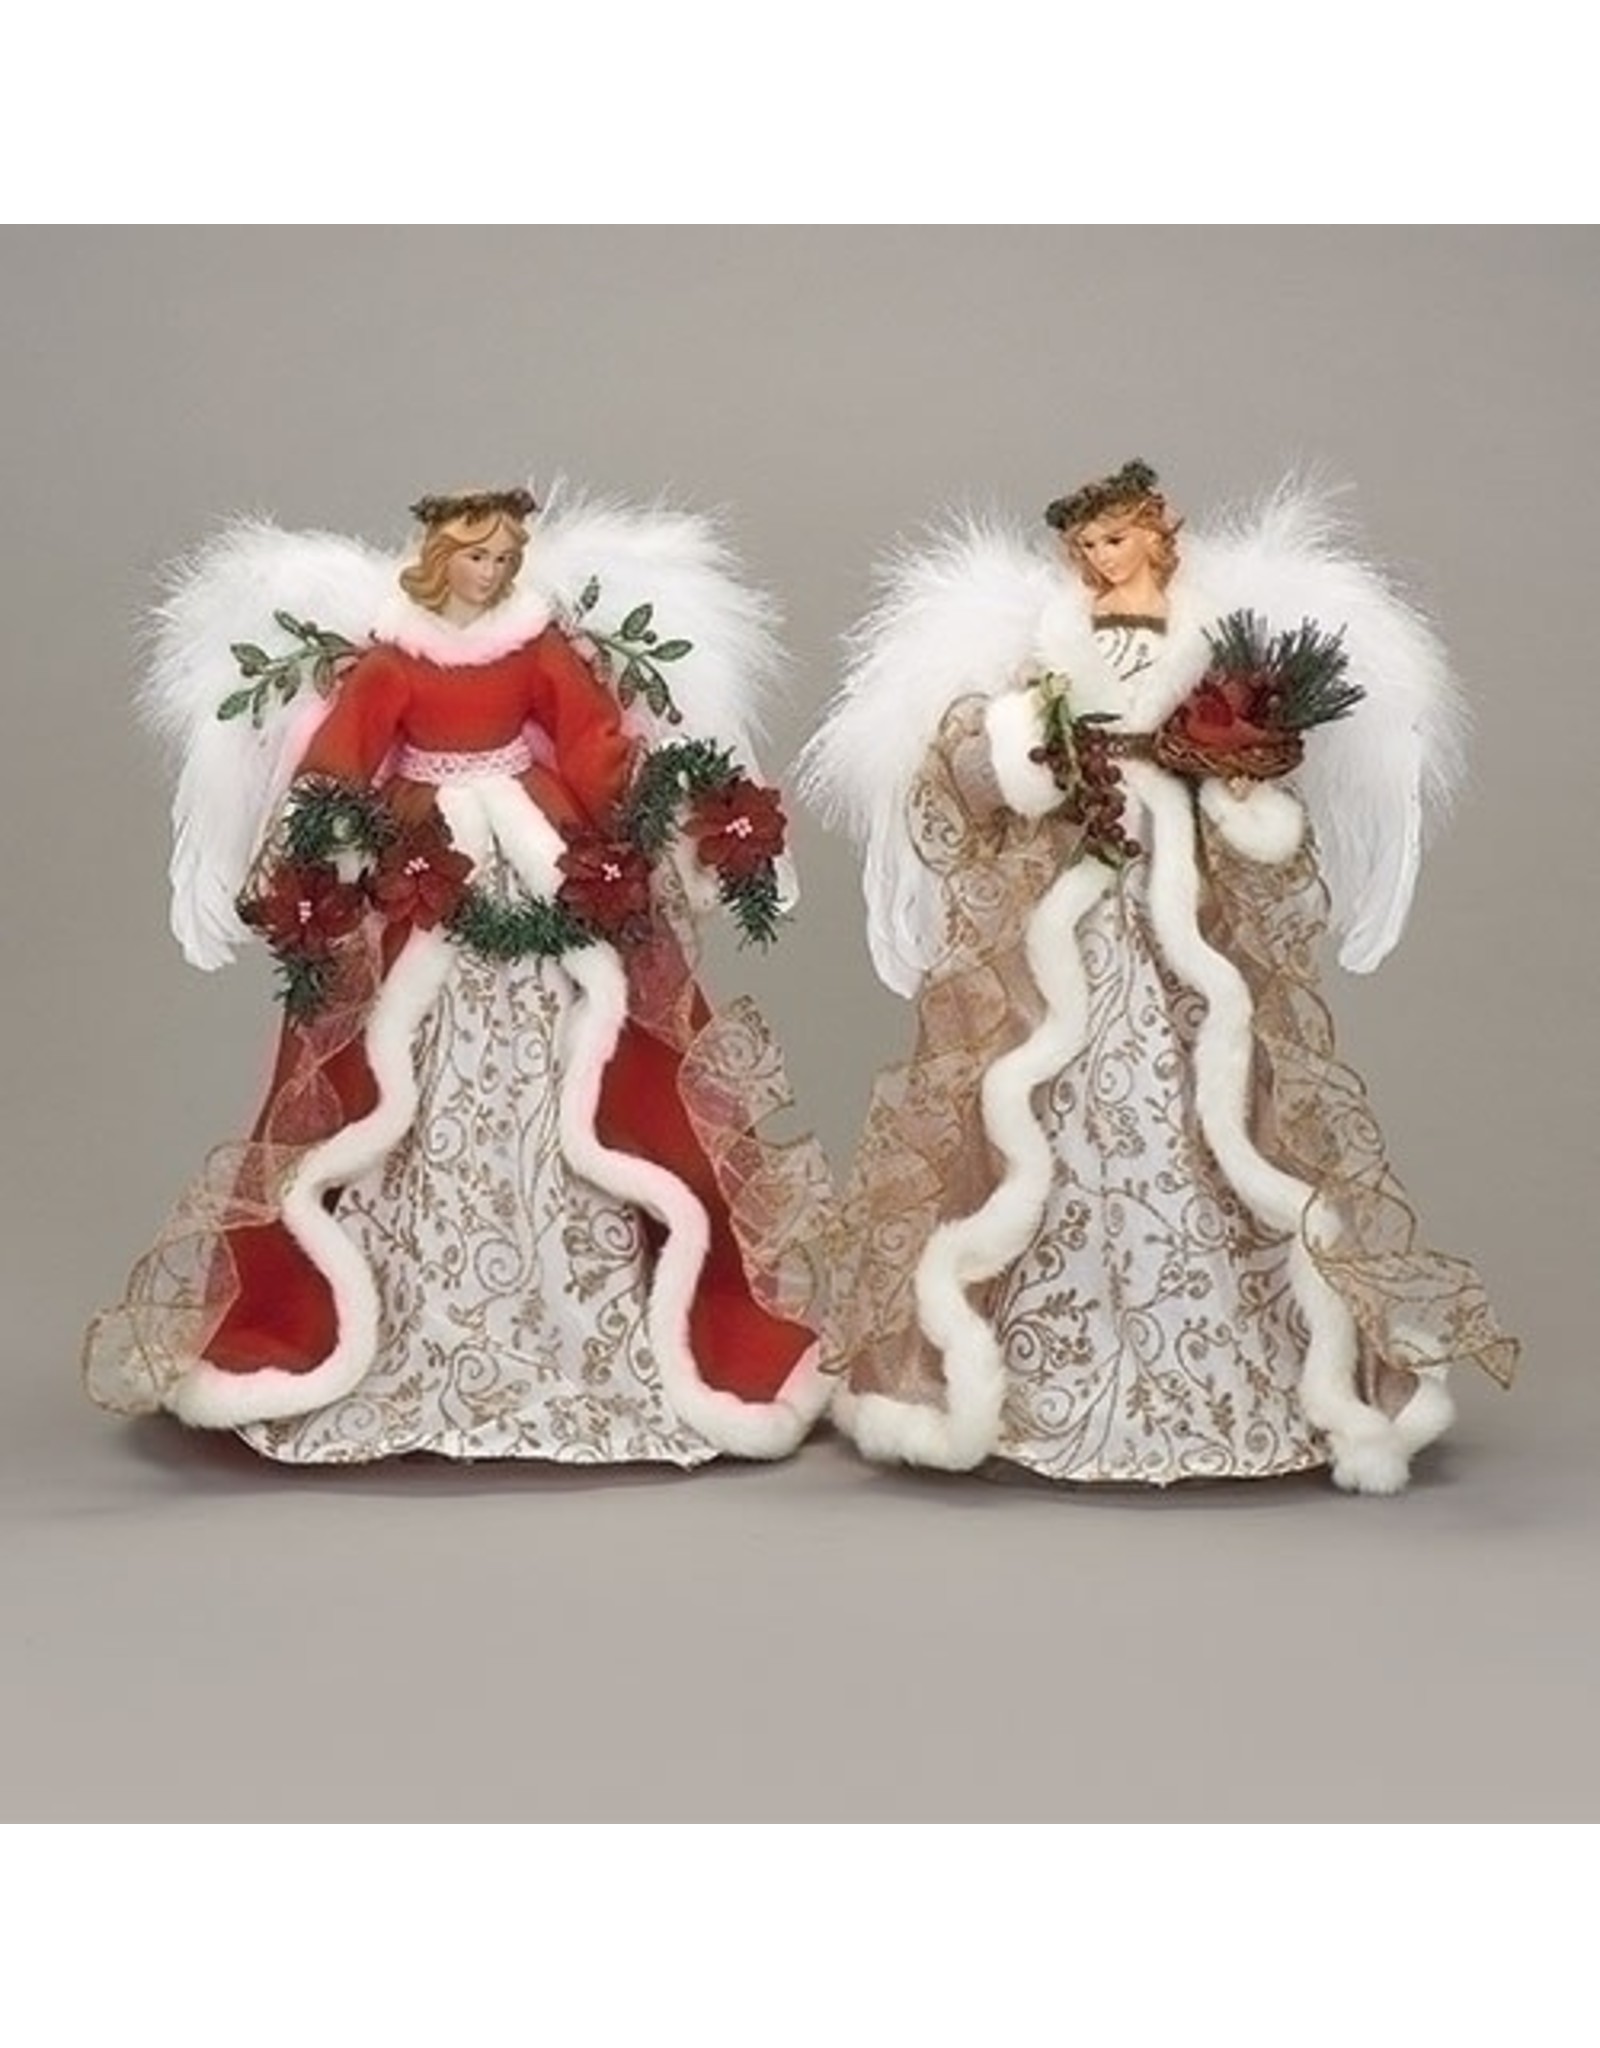 Tree Topper - 18" Angel Red & Green Floral Accents